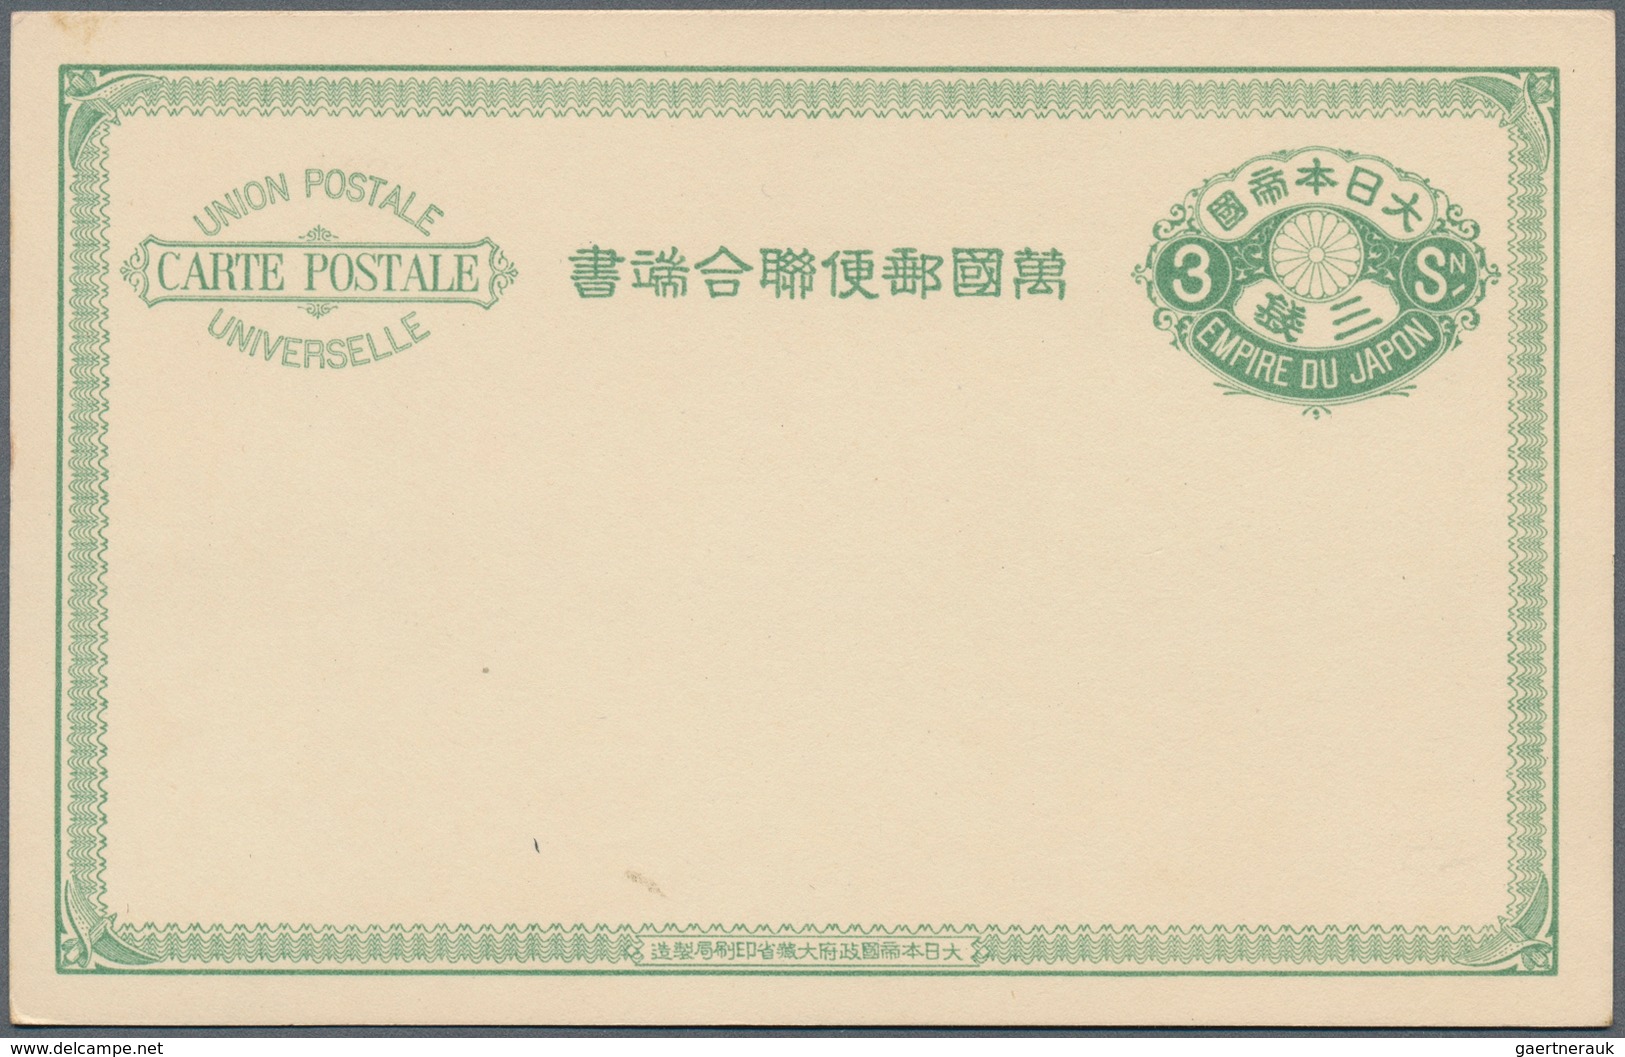 29475 Japan - Ganzsachen: 1874/1955, comprehensive collection of stationery cards/letter cards mint and us